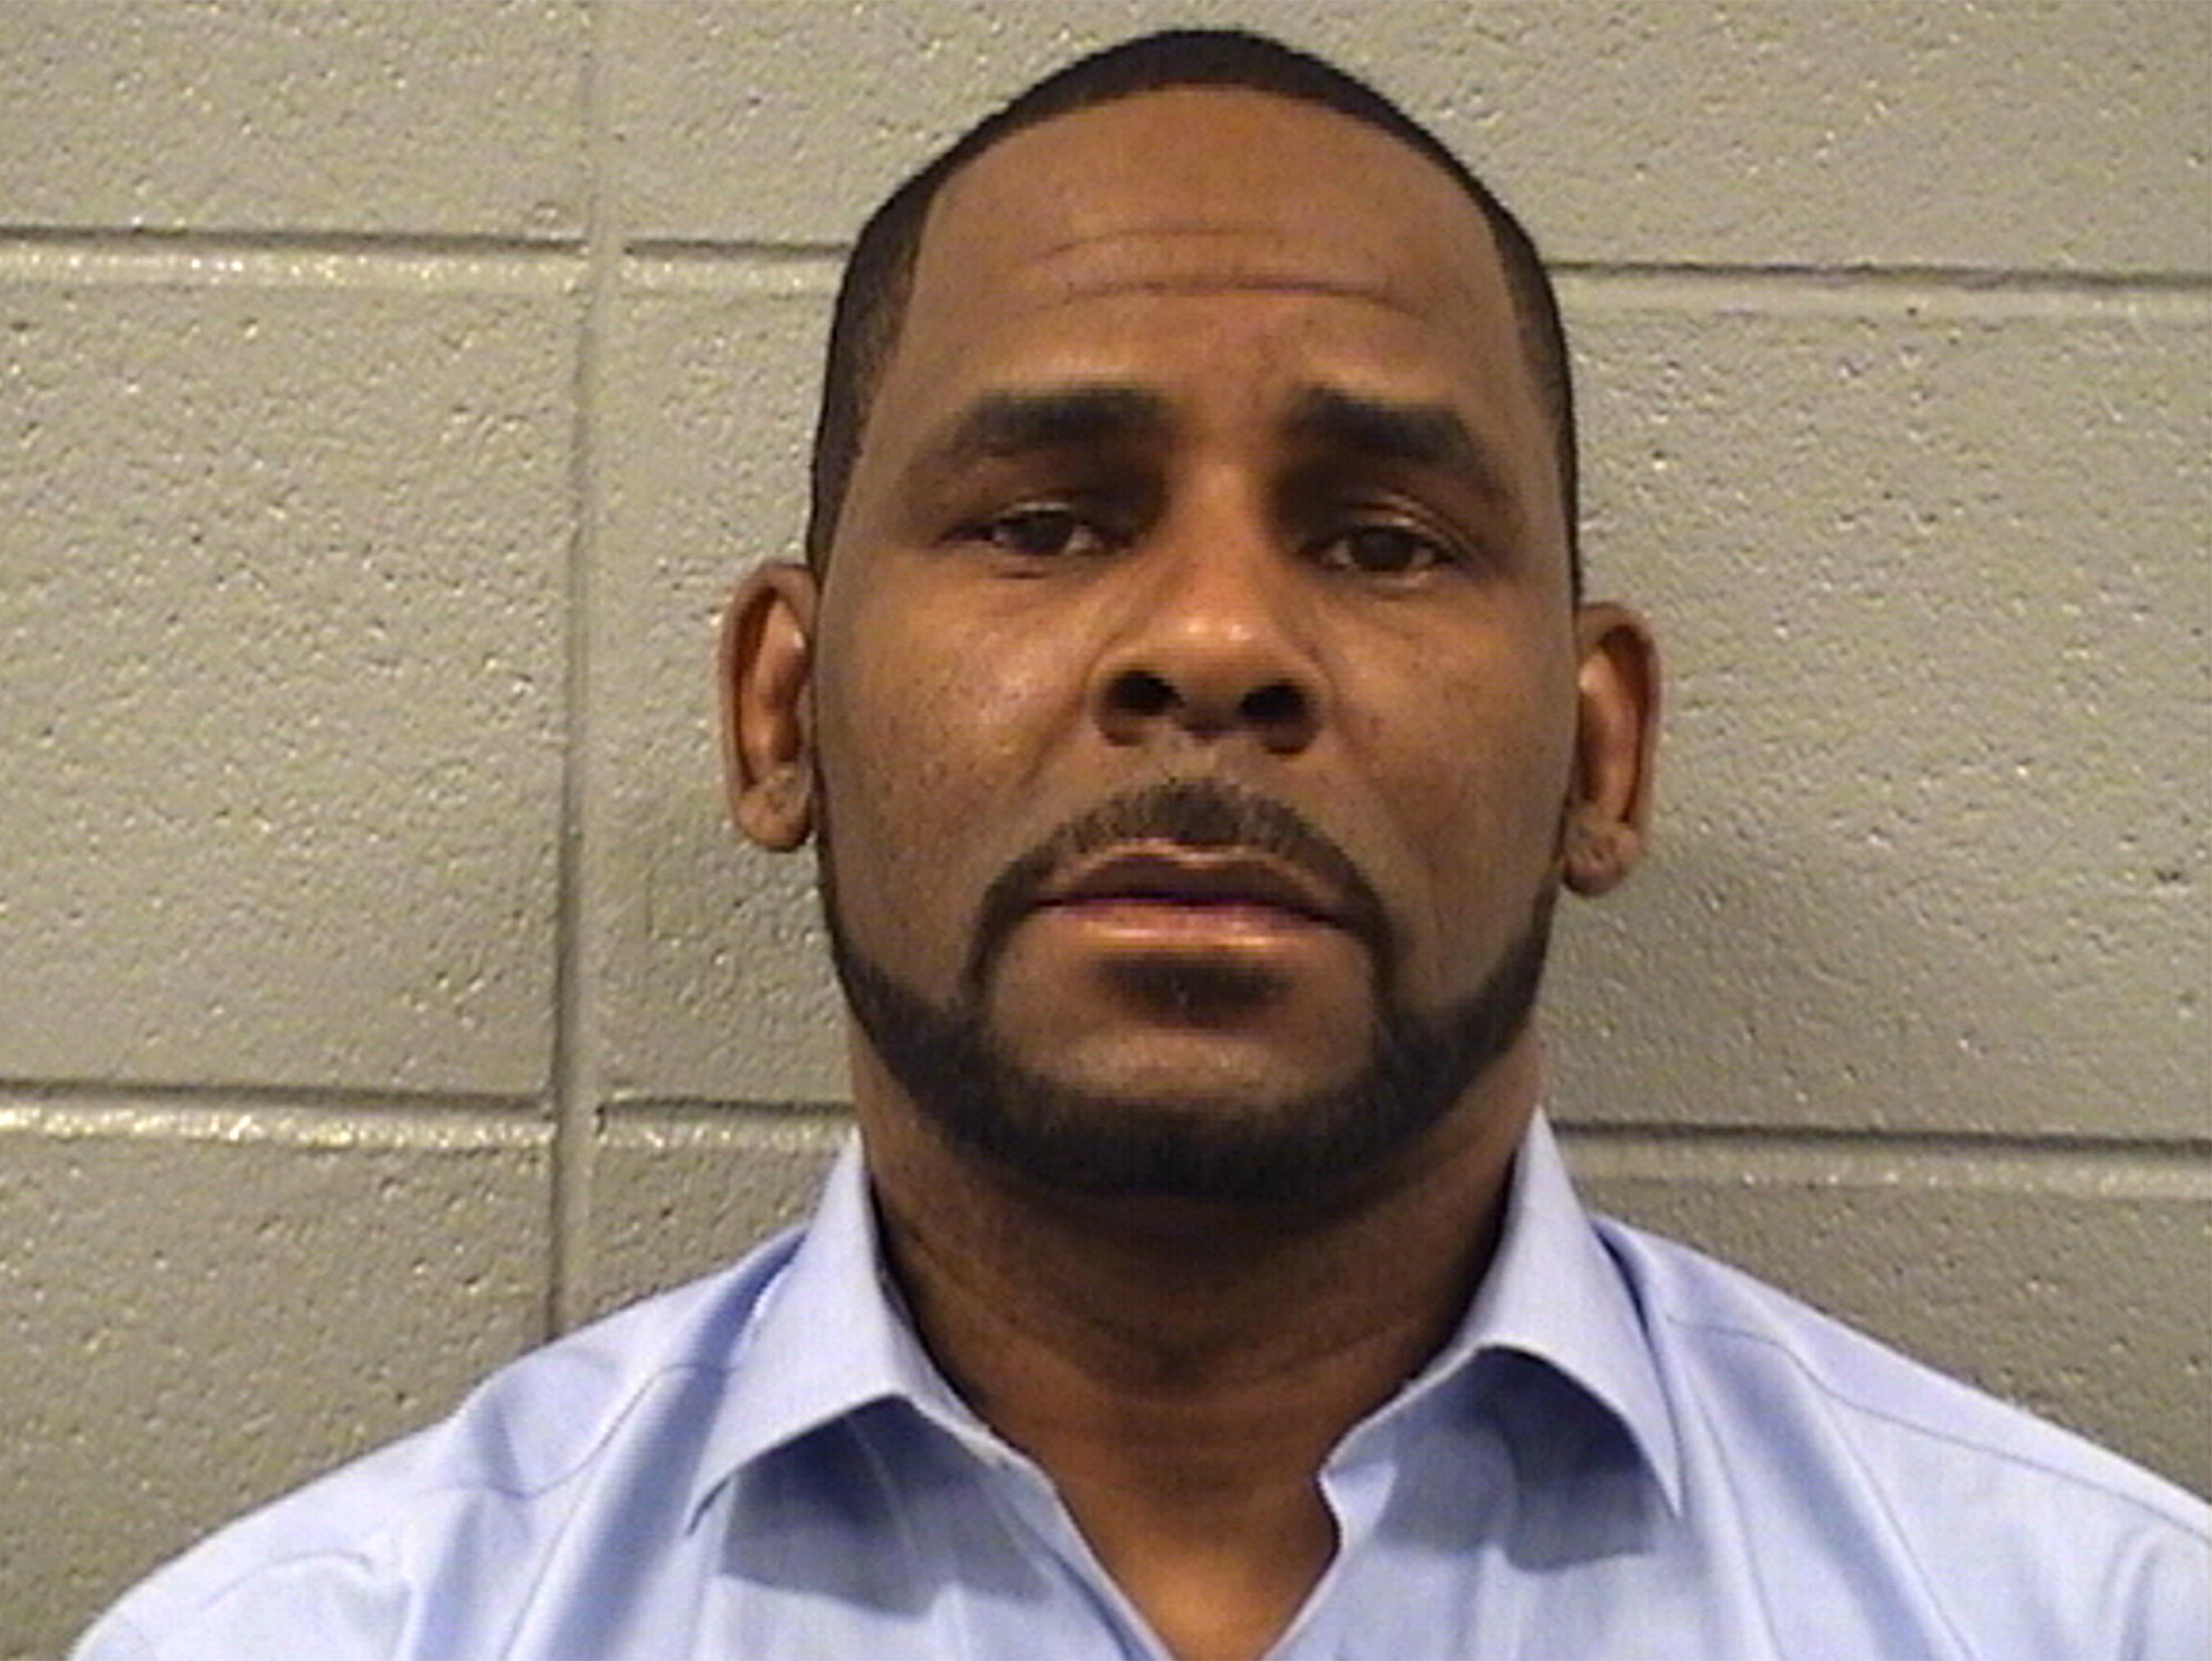 Fresh trouble for R. Kelly, charged in Chicago with sex abuse with minors